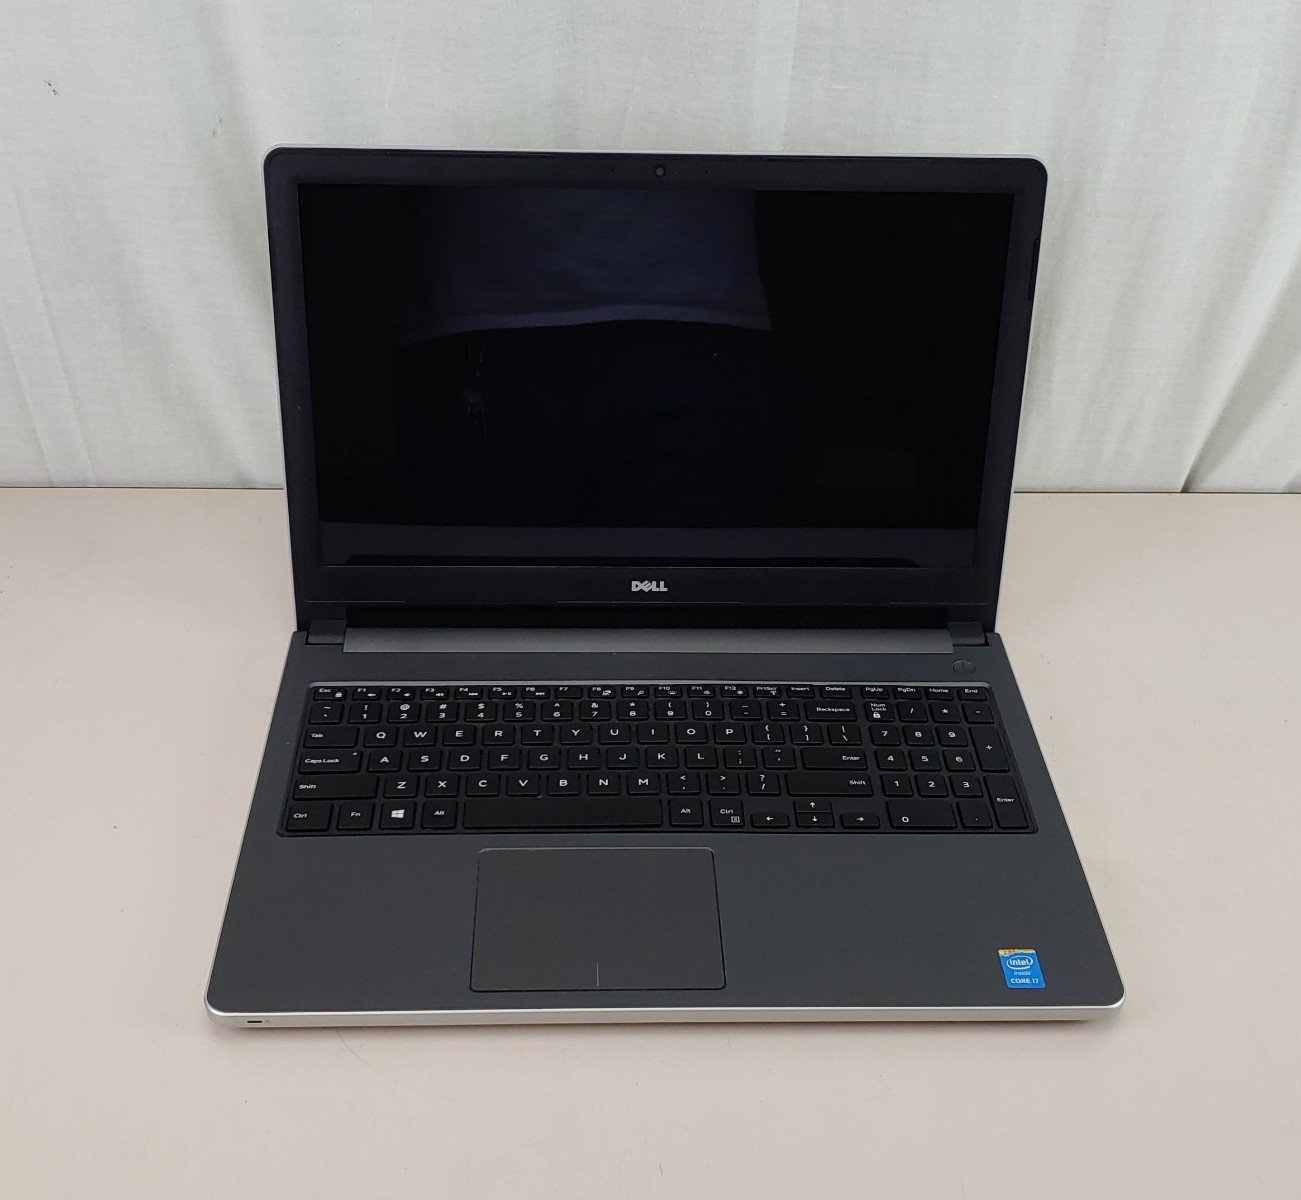 Dell Inspiron 15 Laptop 5558 i7-5500U 8GB Touch screen Tested